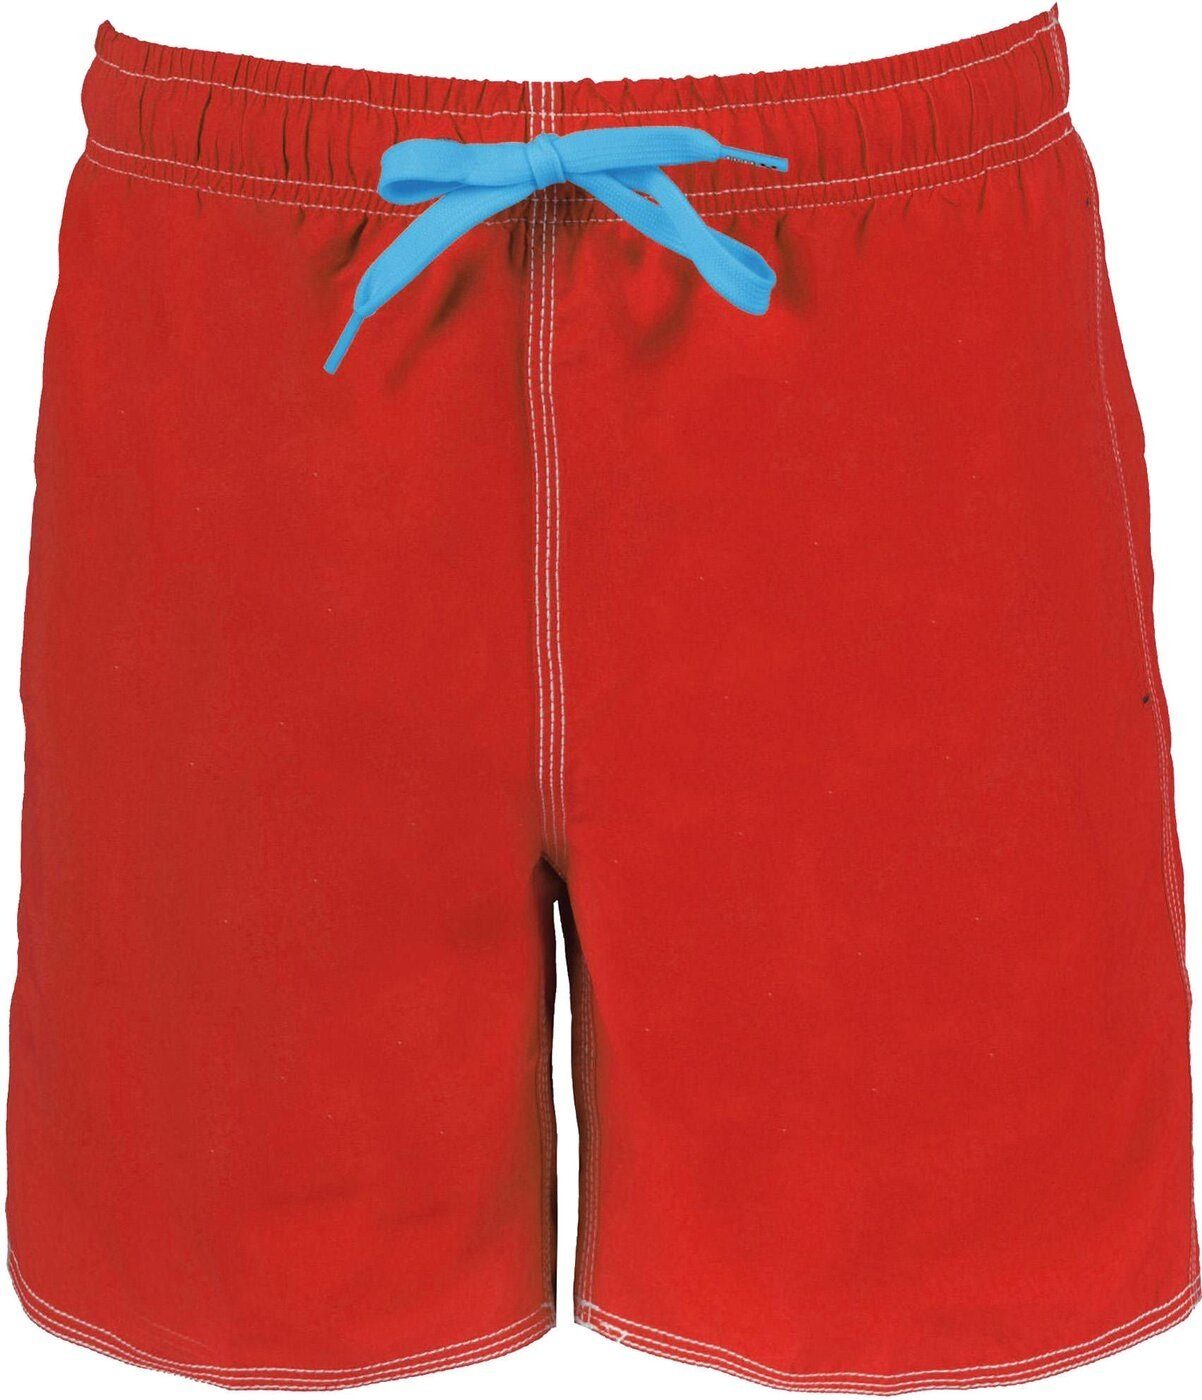 Arena Badeshorts FUNDAMENTALS SOLID 48 RED-TURQUOISE BOXER